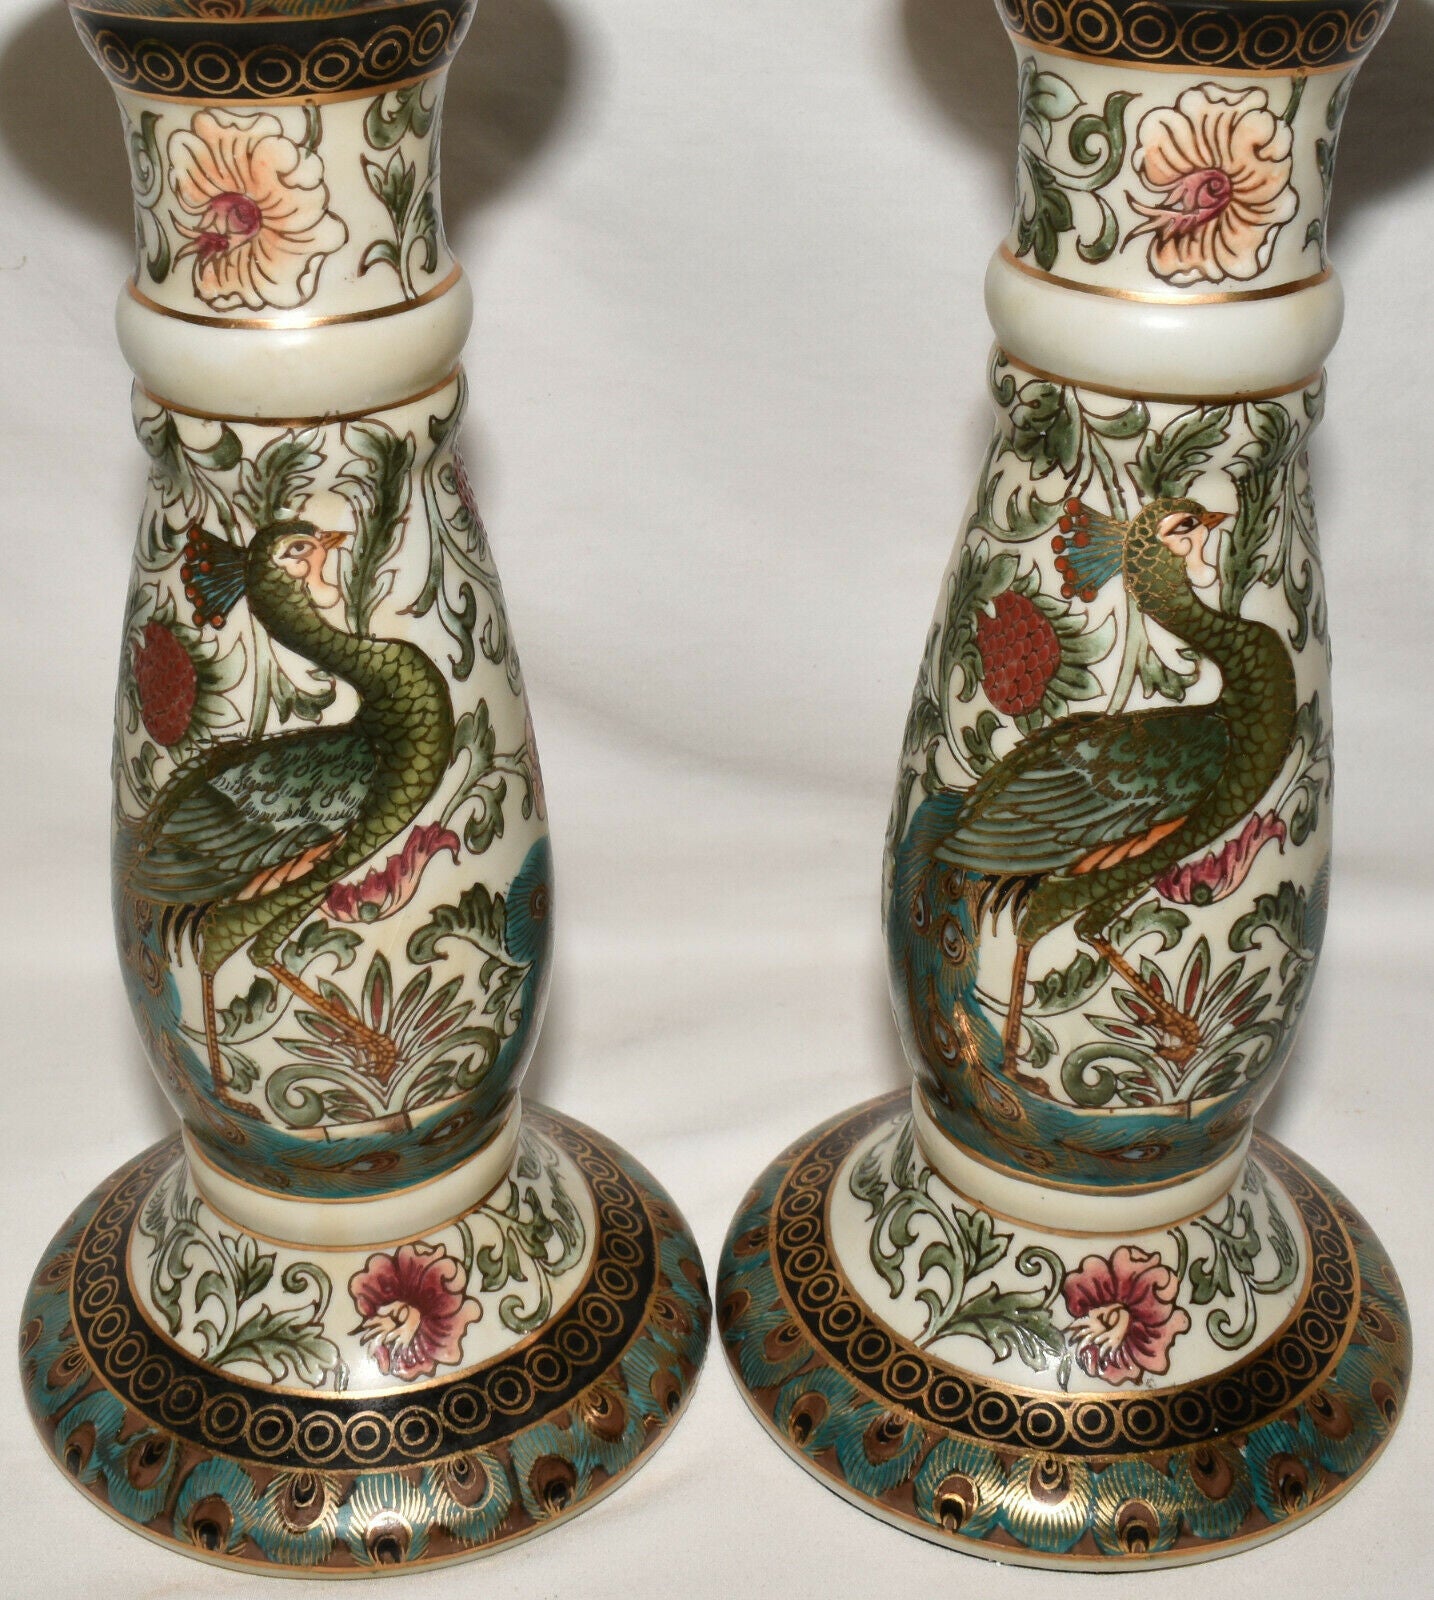 Pair Vintage Asian Cloisonne Enamel Candle Holders w Peacocks 9.75" Candle Stands